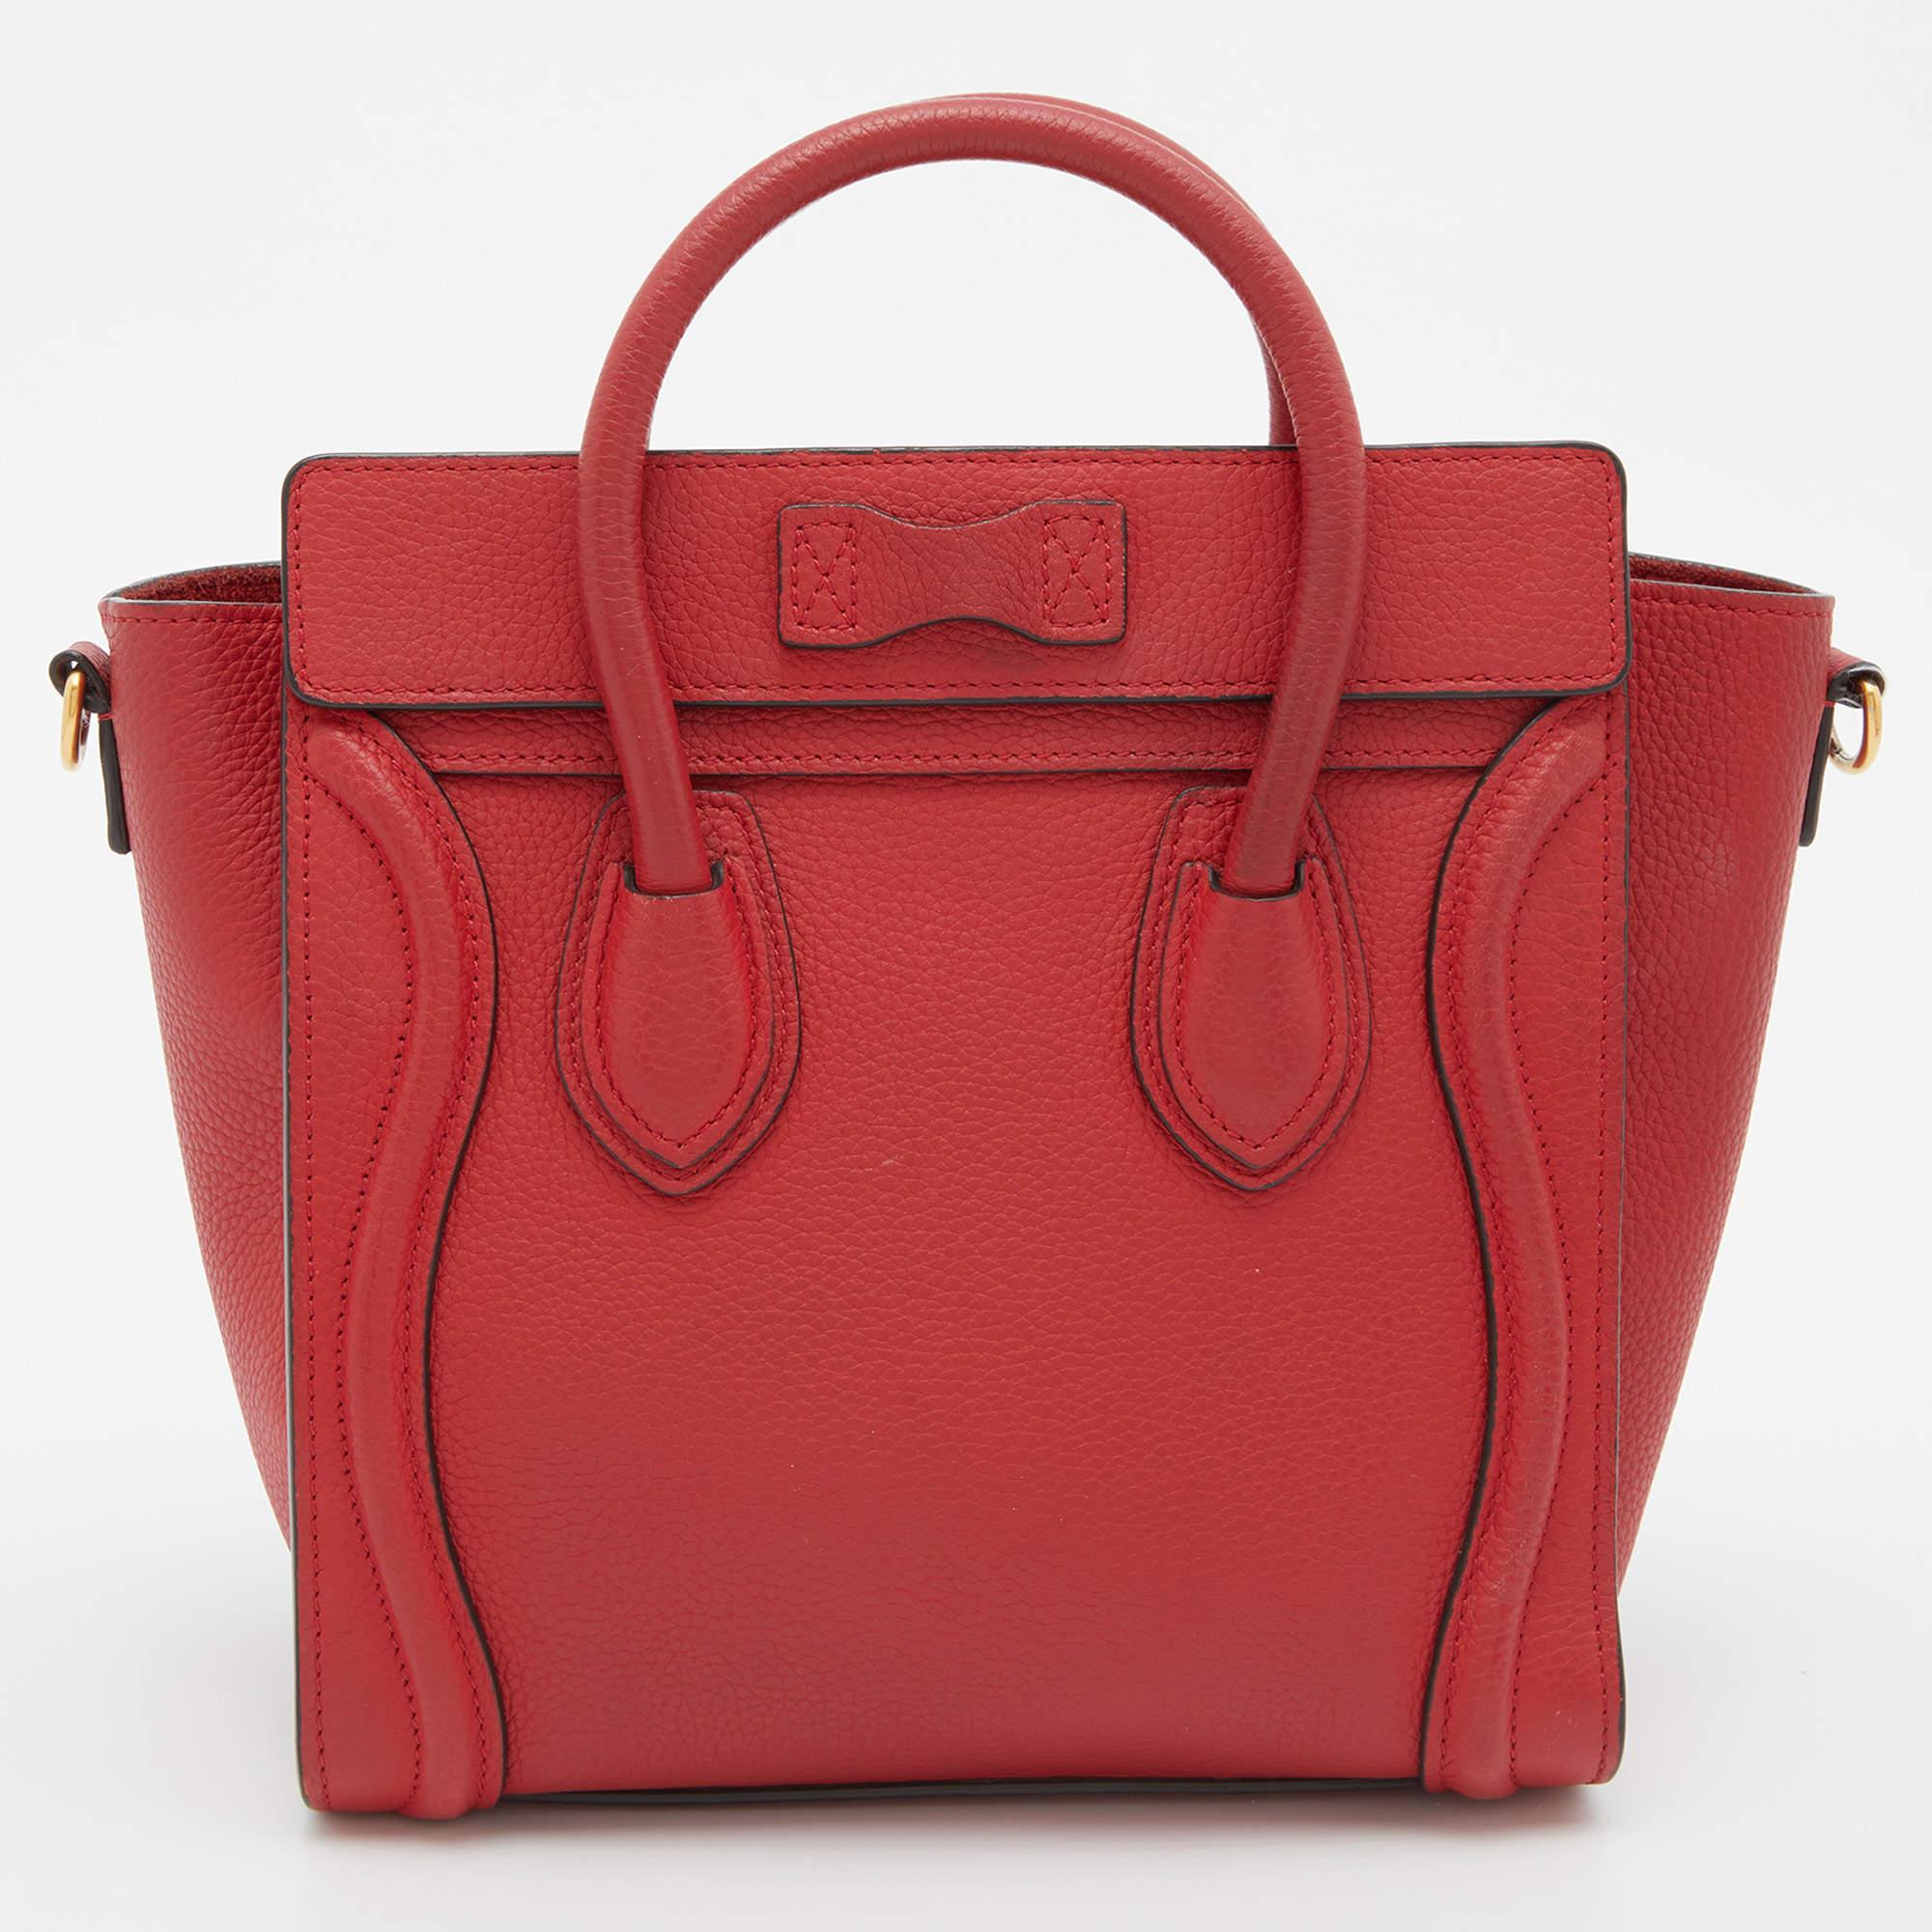 This adorable Nano Luggage tote from Celine is a popular design. The red tote is crafted from grain leather and features signature flappy wings. It comes with rolled top handles, a front zip pocket, and a detachable shoulder strap.

Includes: